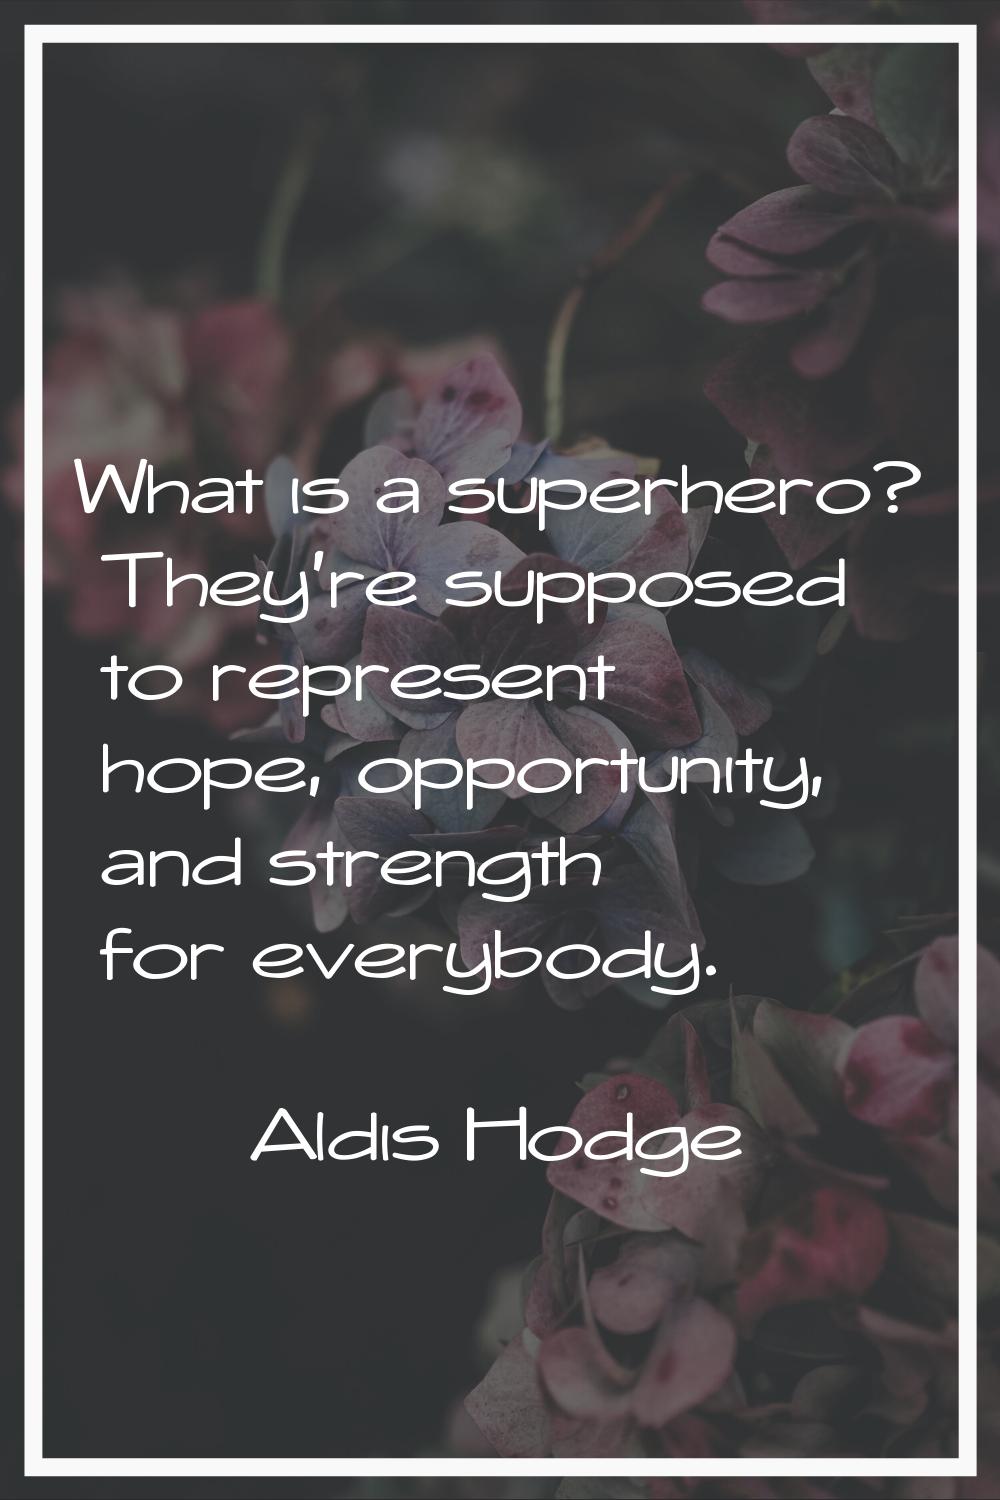 What is a superhero? They're supposed to represent hope, opportunity, and strength for everybody.